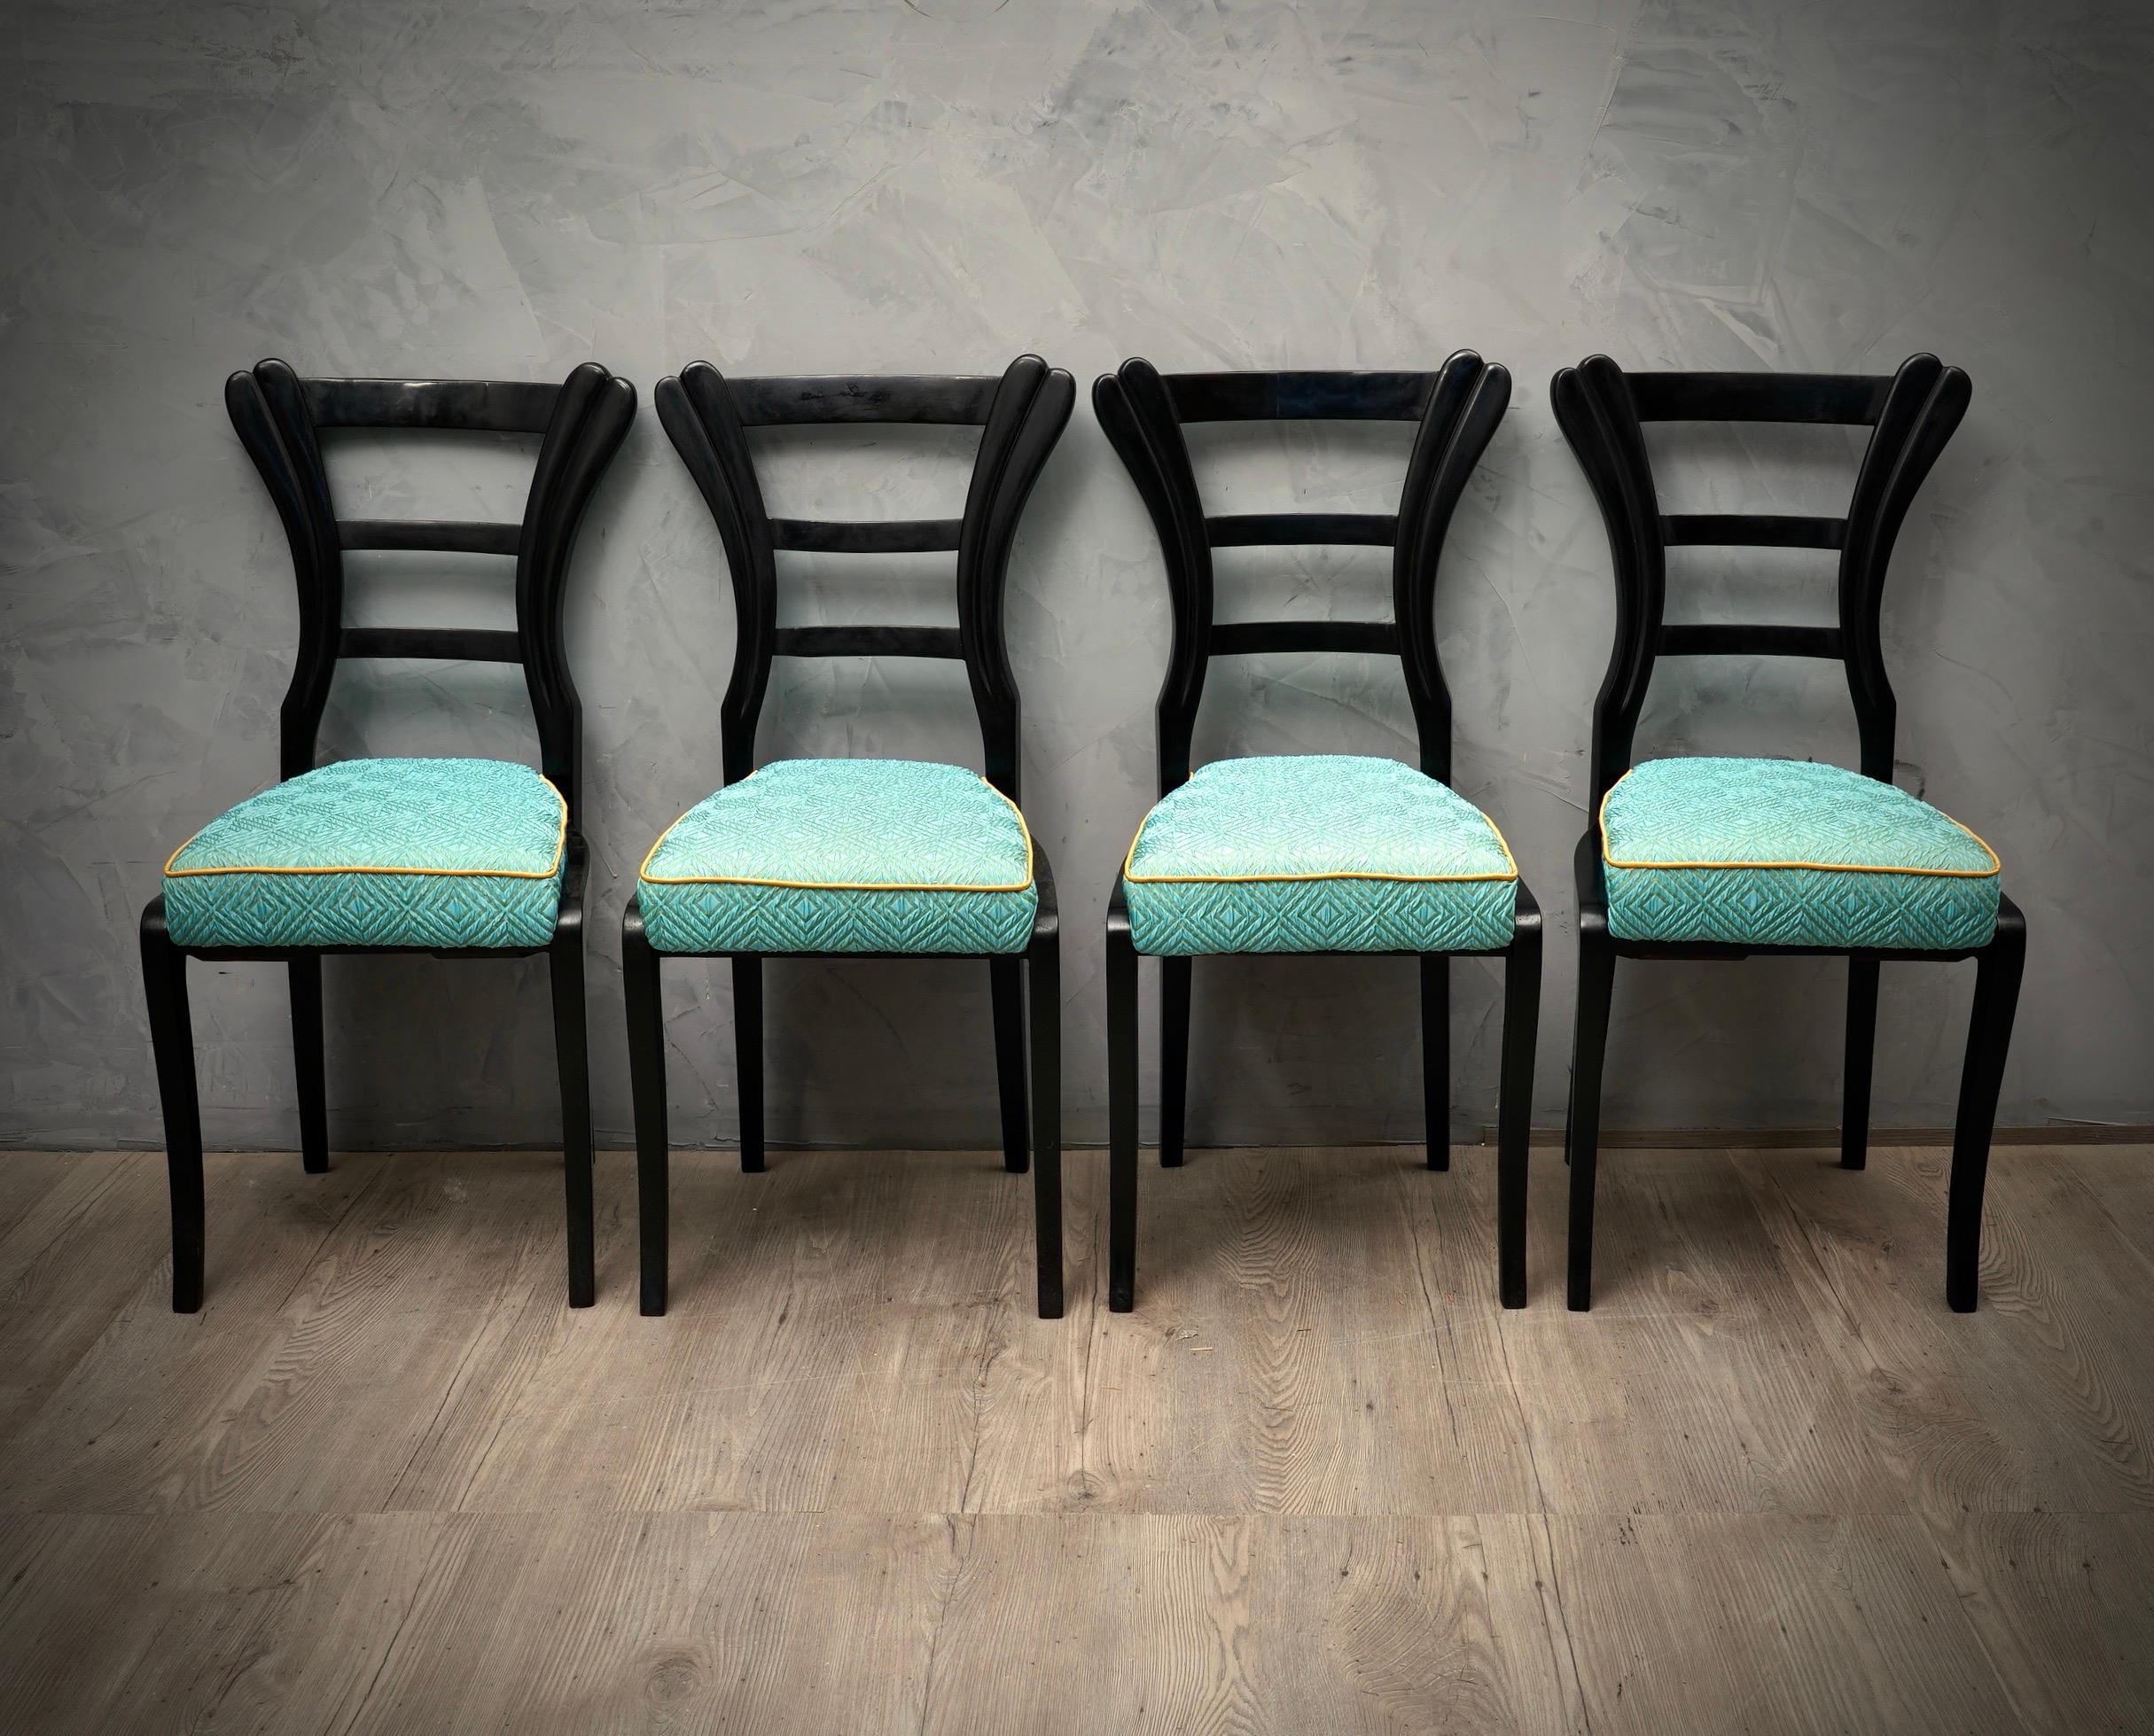 Four beautiful Biedermeier chairs with an unmistakable design, black shellac for the structure and a beautiful blue silk for the seat.

The chairs are polished in black shellac, have a very beautiful design, saber front legs and back with